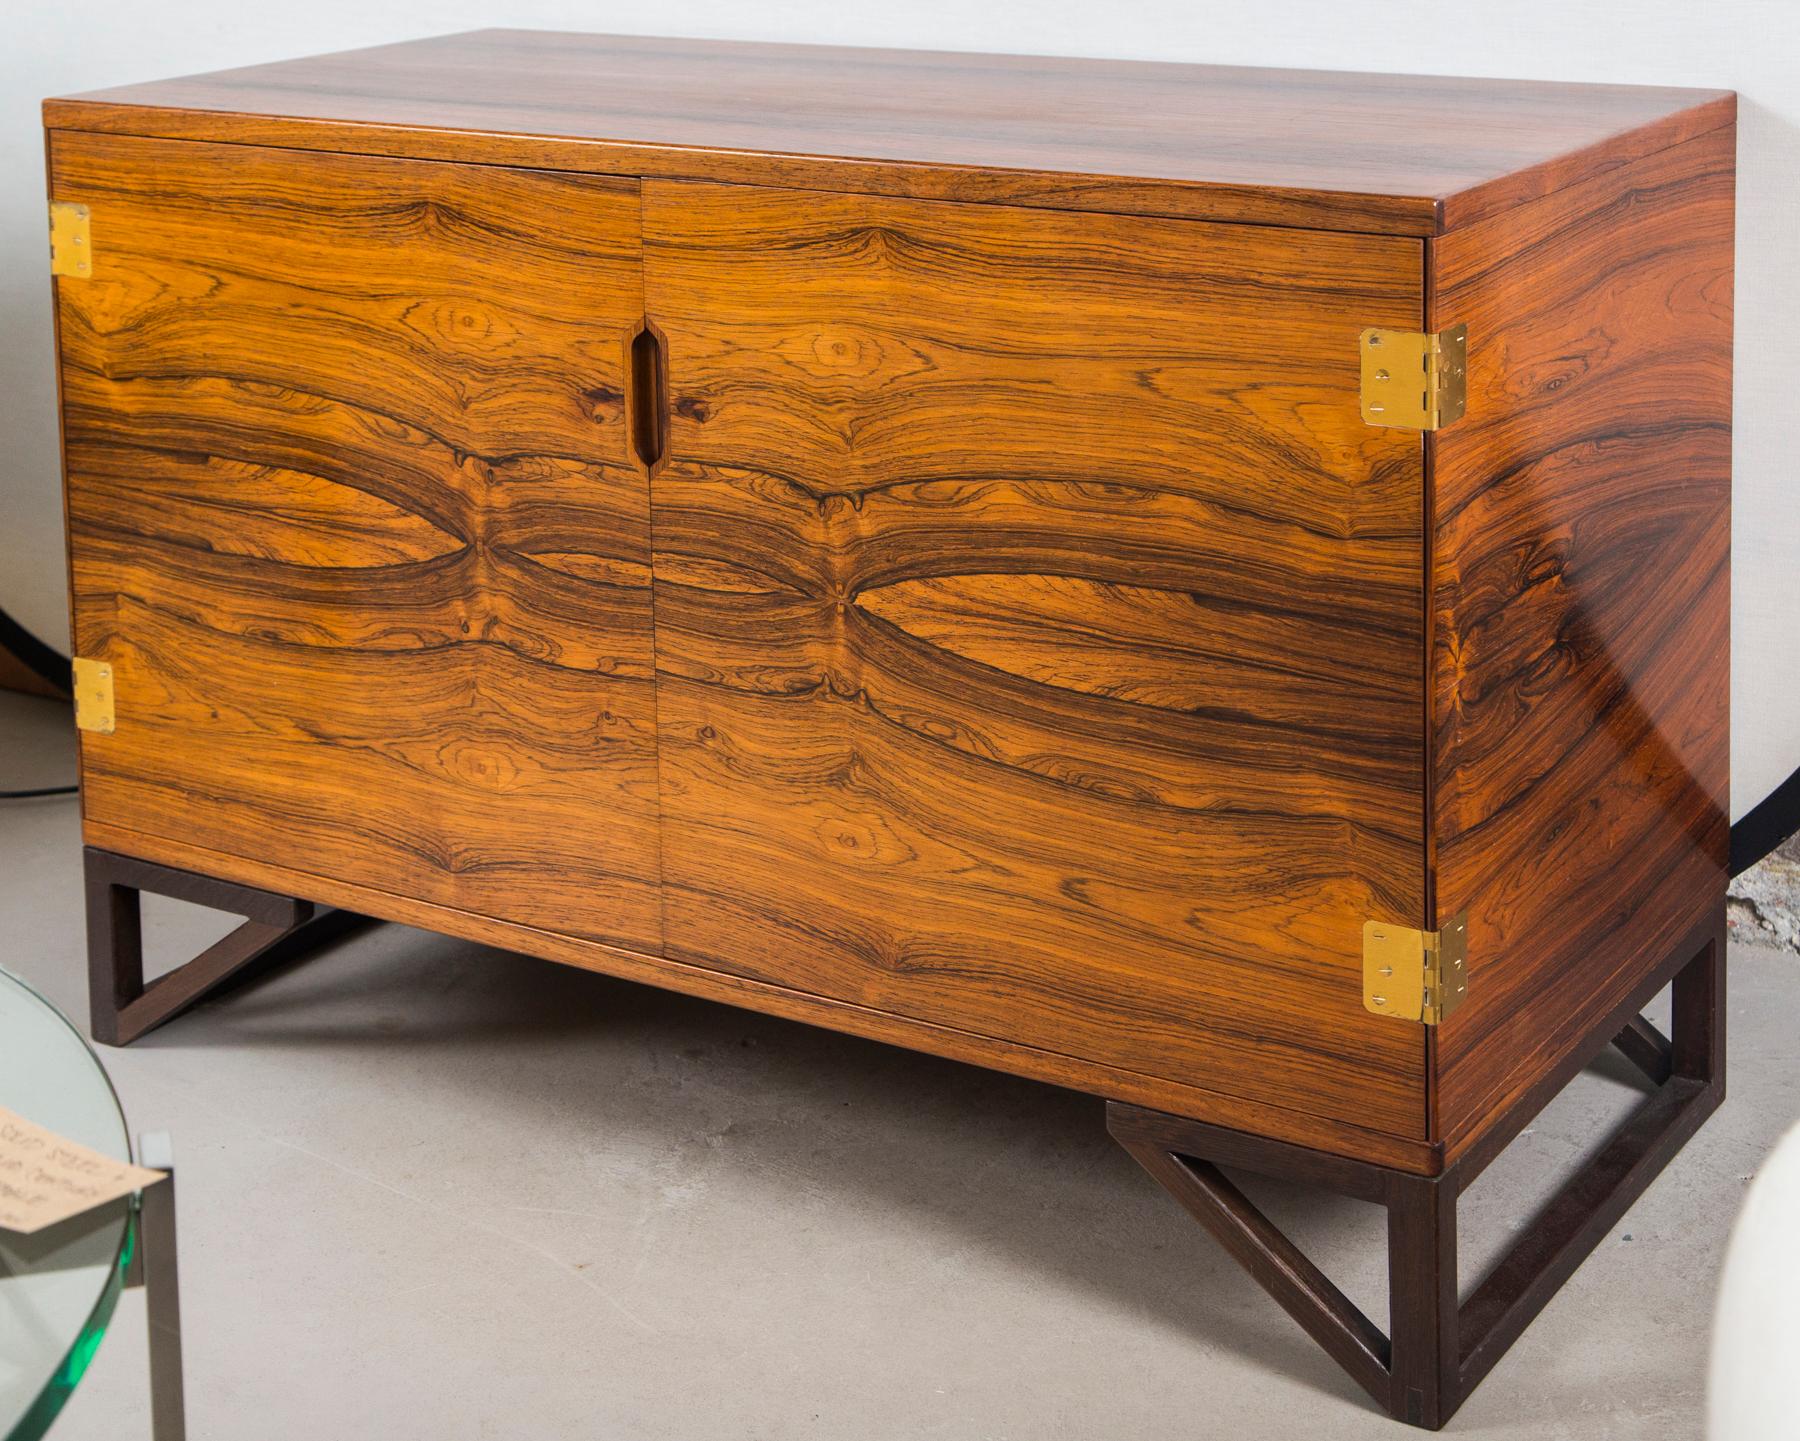 Elegant cabinet or chest in rosewood with brass hardware. Designed by Svend Langkilde M.A.A. Made in Denmark, circa 1960s. Great original condition.